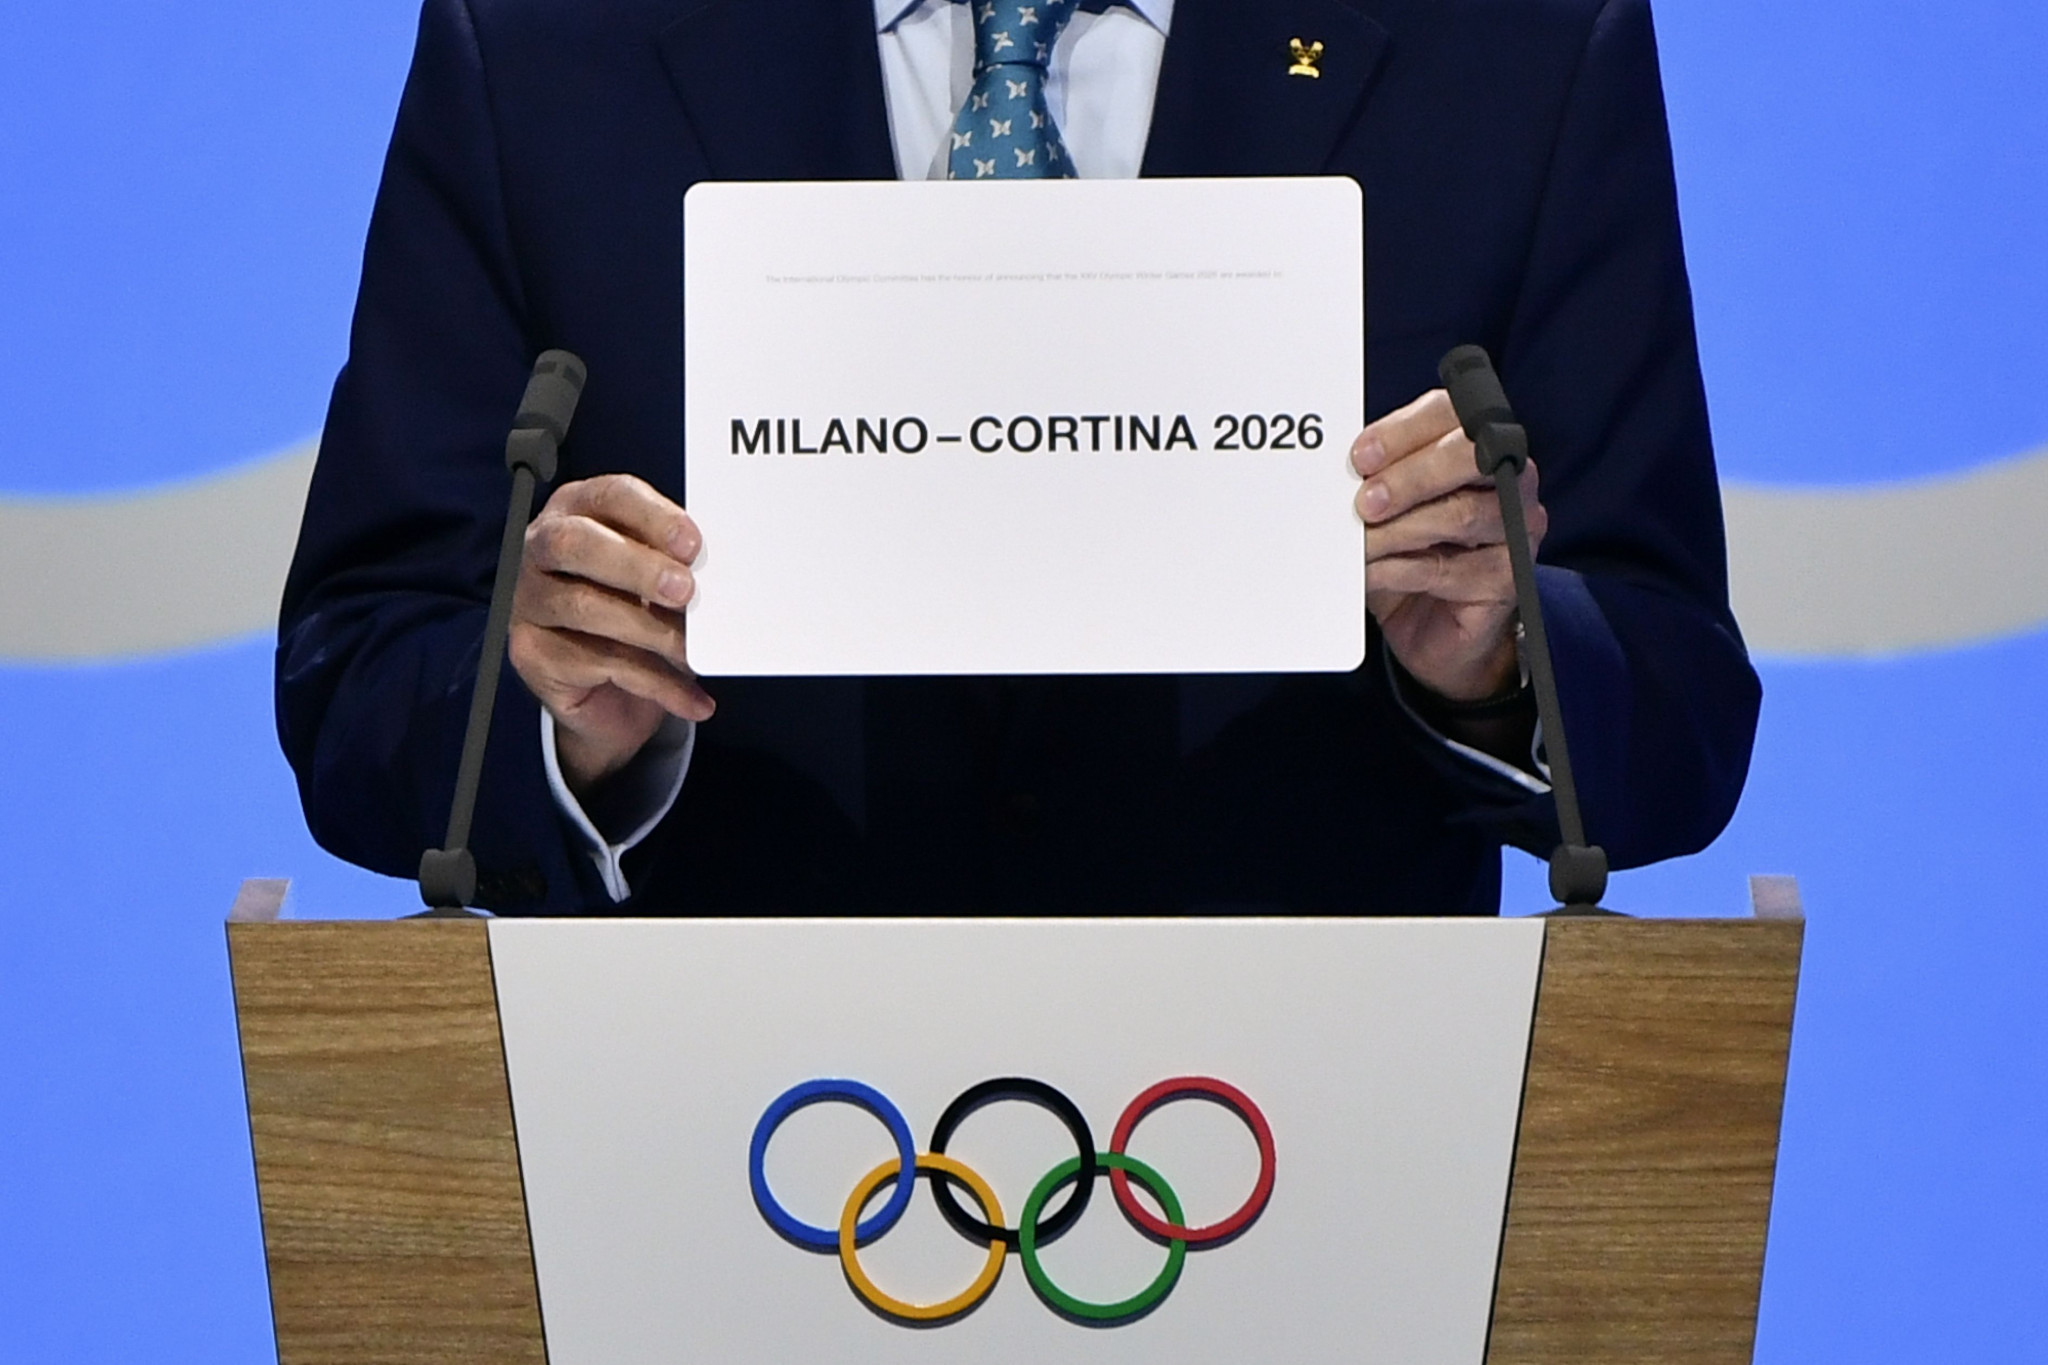 Milan Cortina 2026 was awarded the Winter Olympics in 2019 ©Getty Images